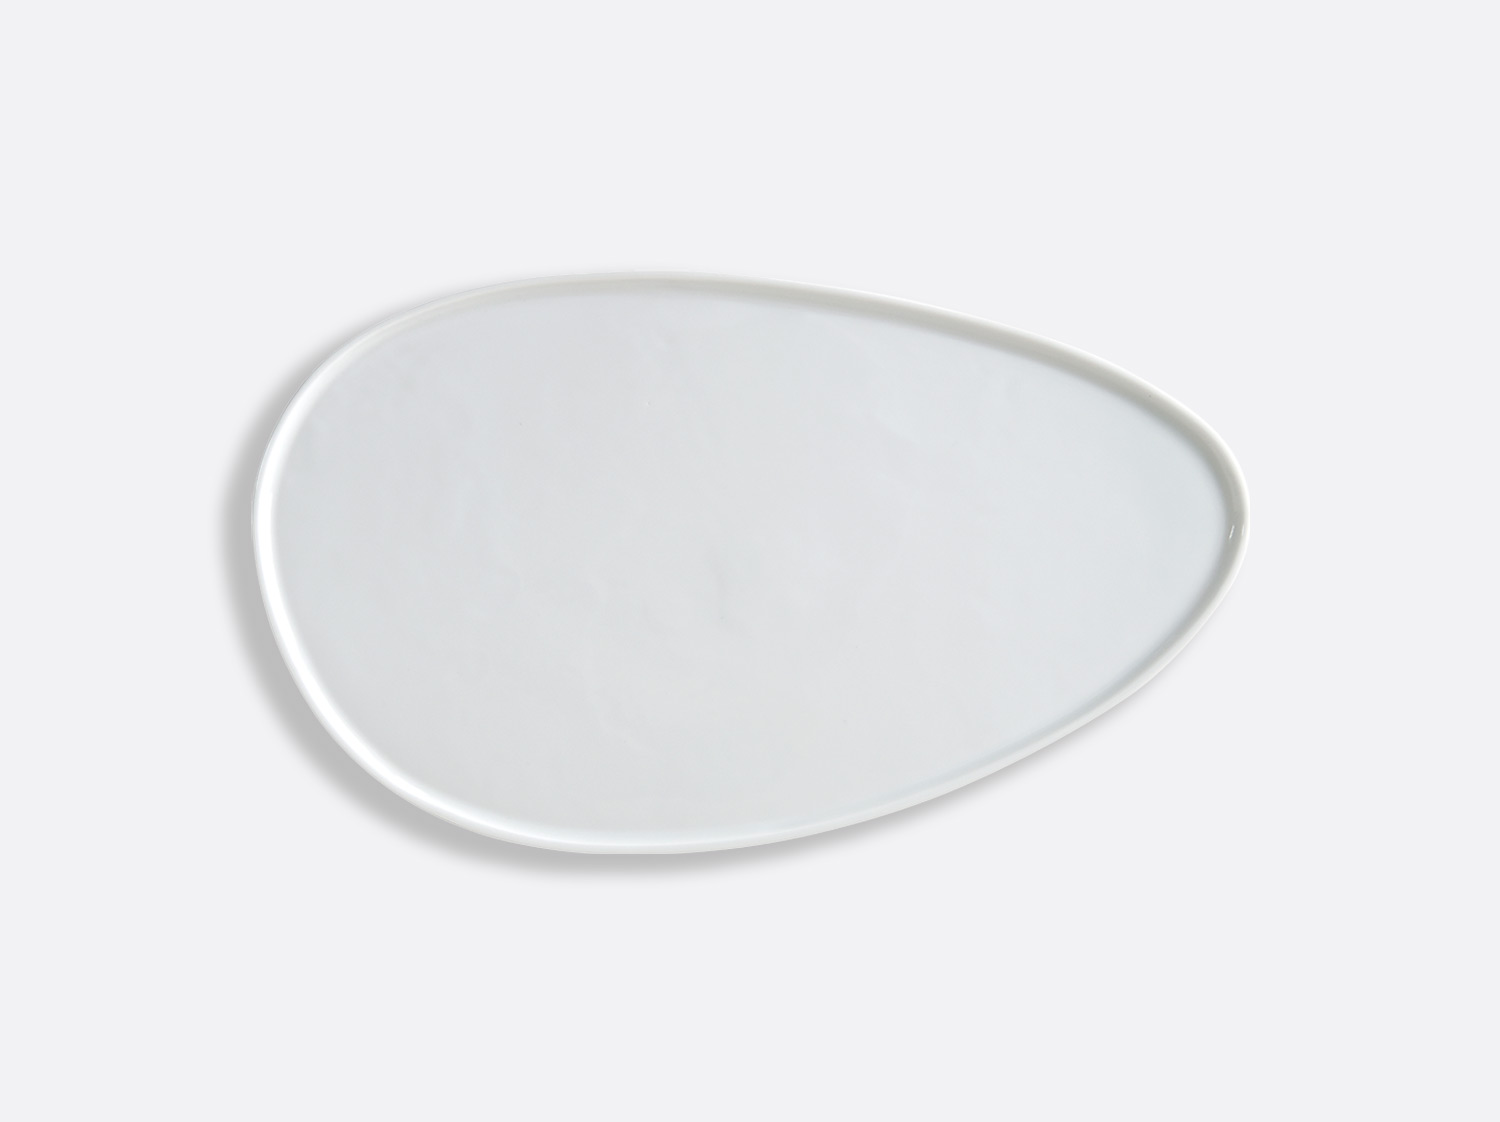 China Platter S1 white of the collection Ombres - Sarah-Linda Forrer | Bernardaud